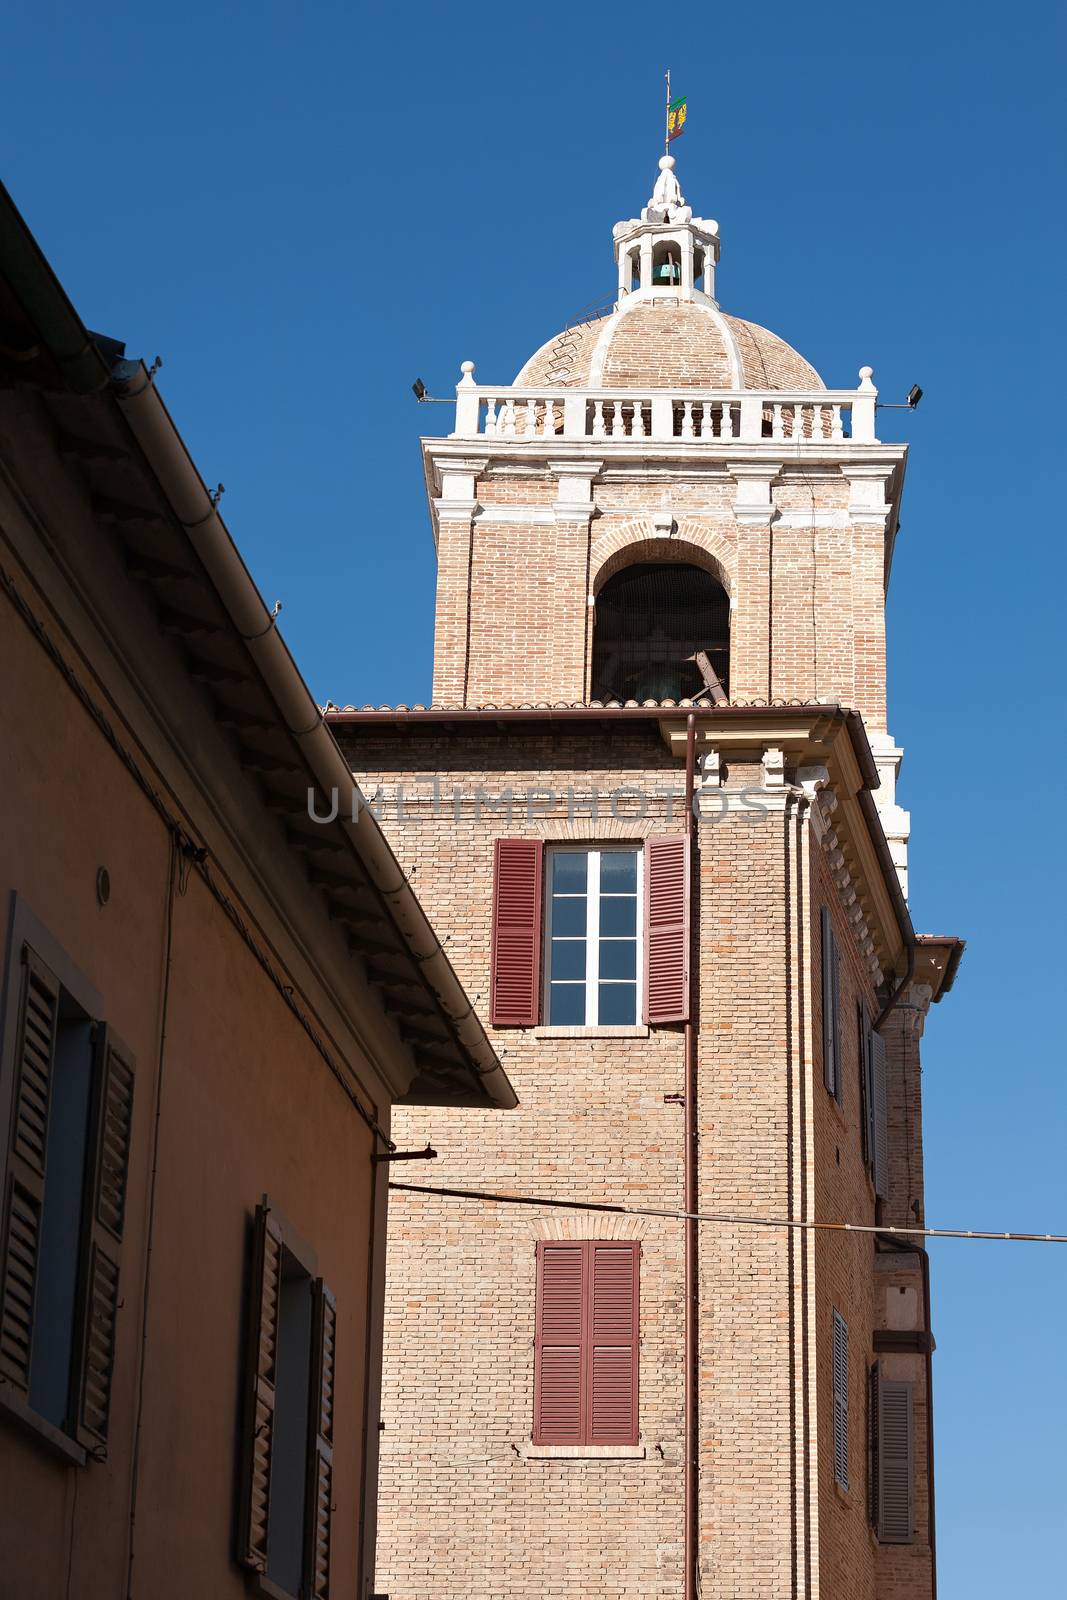 The bell tower of the town hall in Senigallia seen from a side under a blue sky.